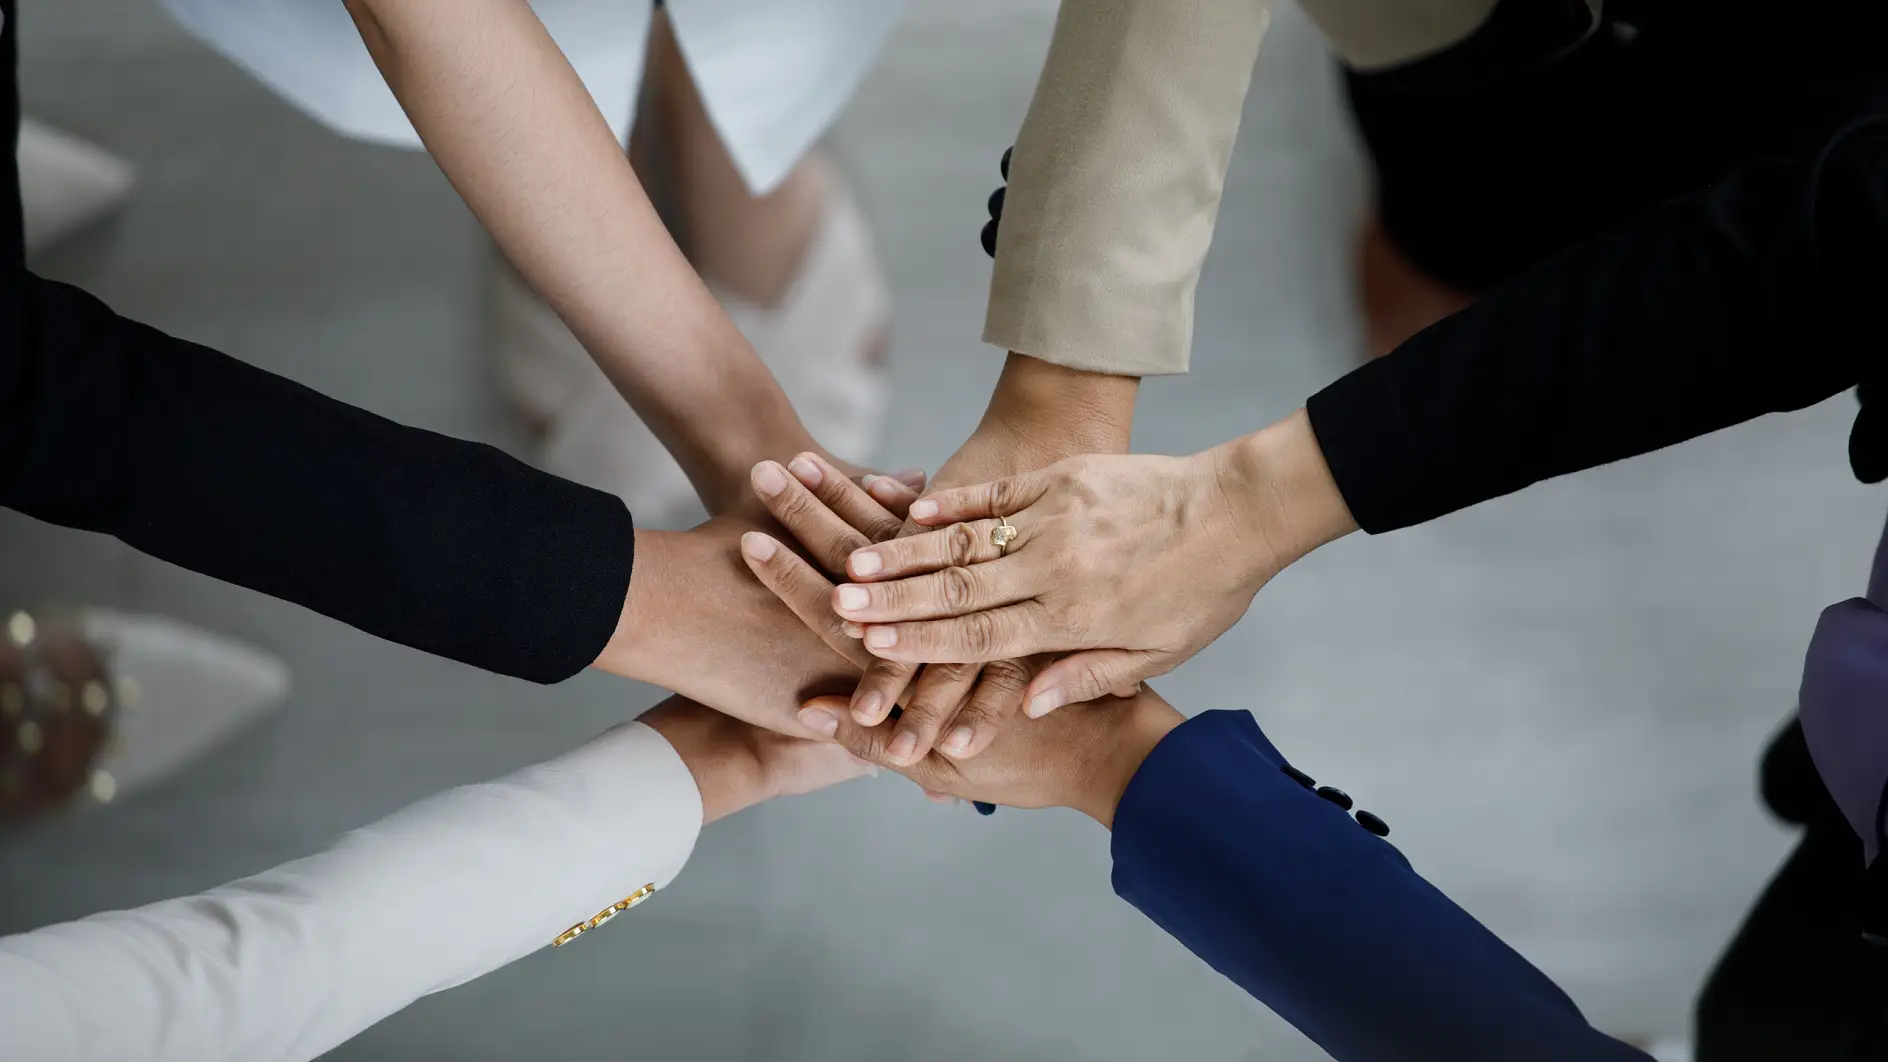 Top view close up shot of professional successful group of businessman businesswoman colleagues partnership team hands holding together for company strong trust teamwork unity achievement commitment.